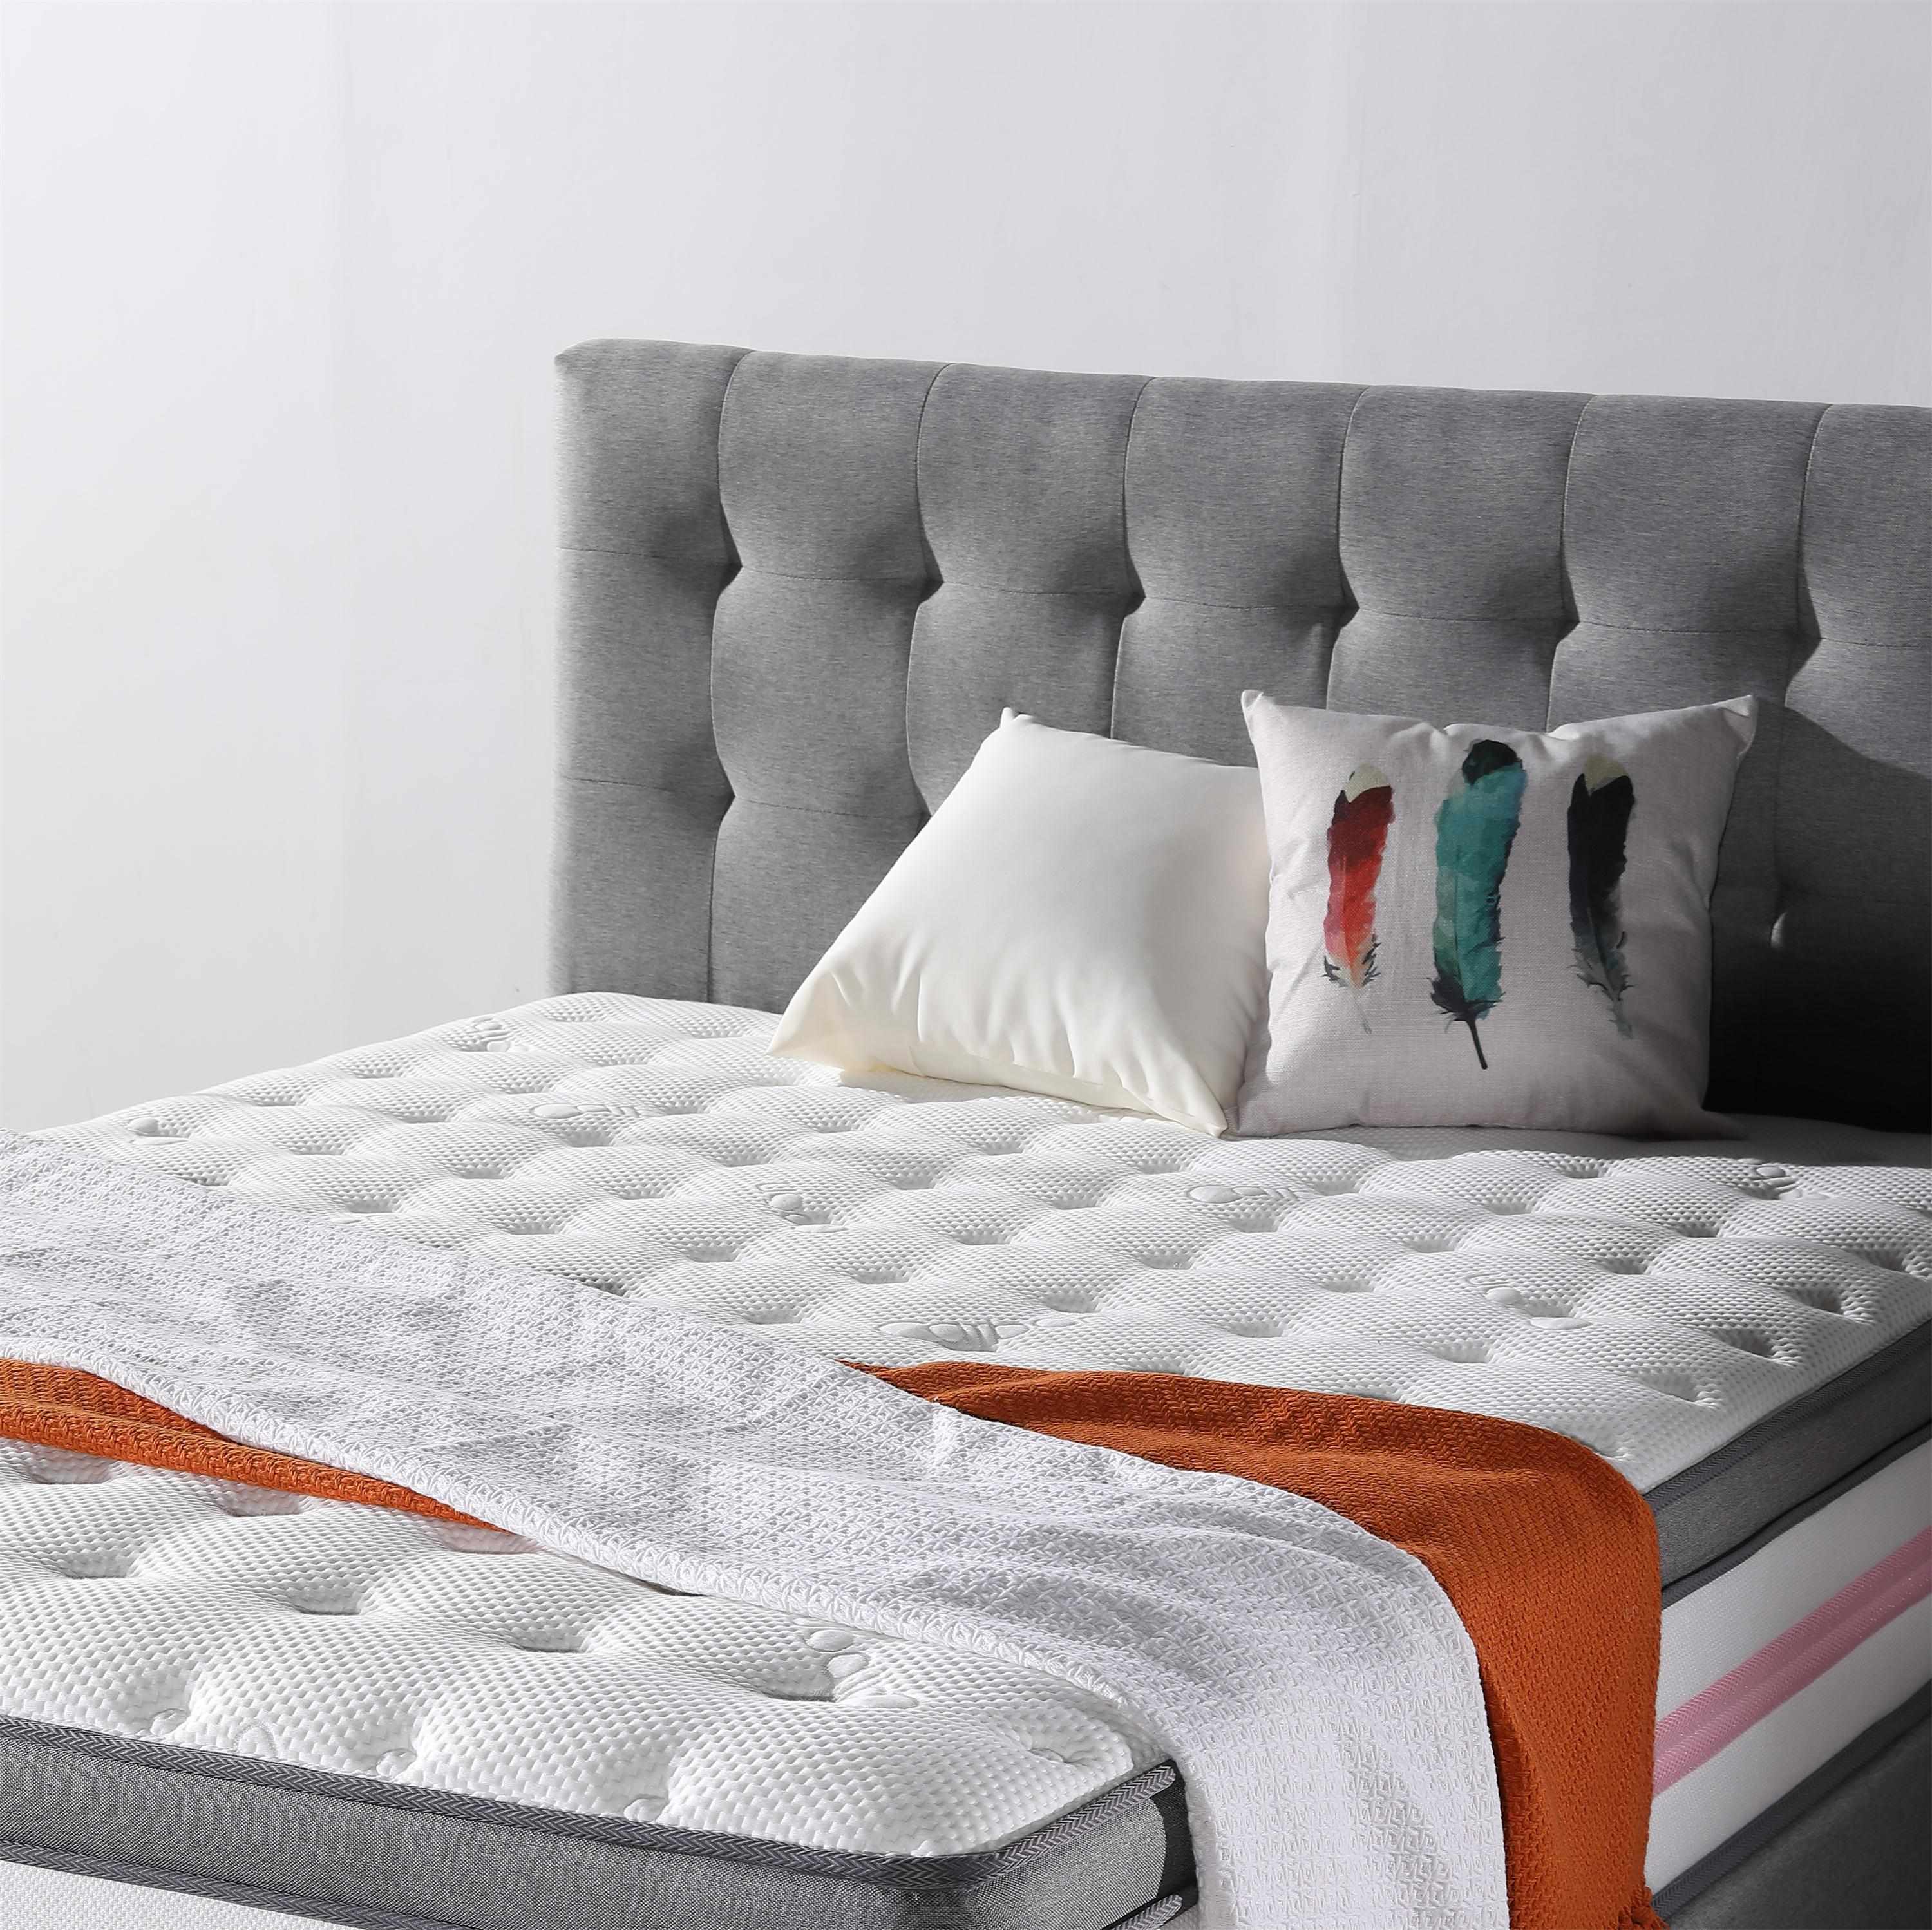 JLH new-arrival cotton mattress cost for bedroom